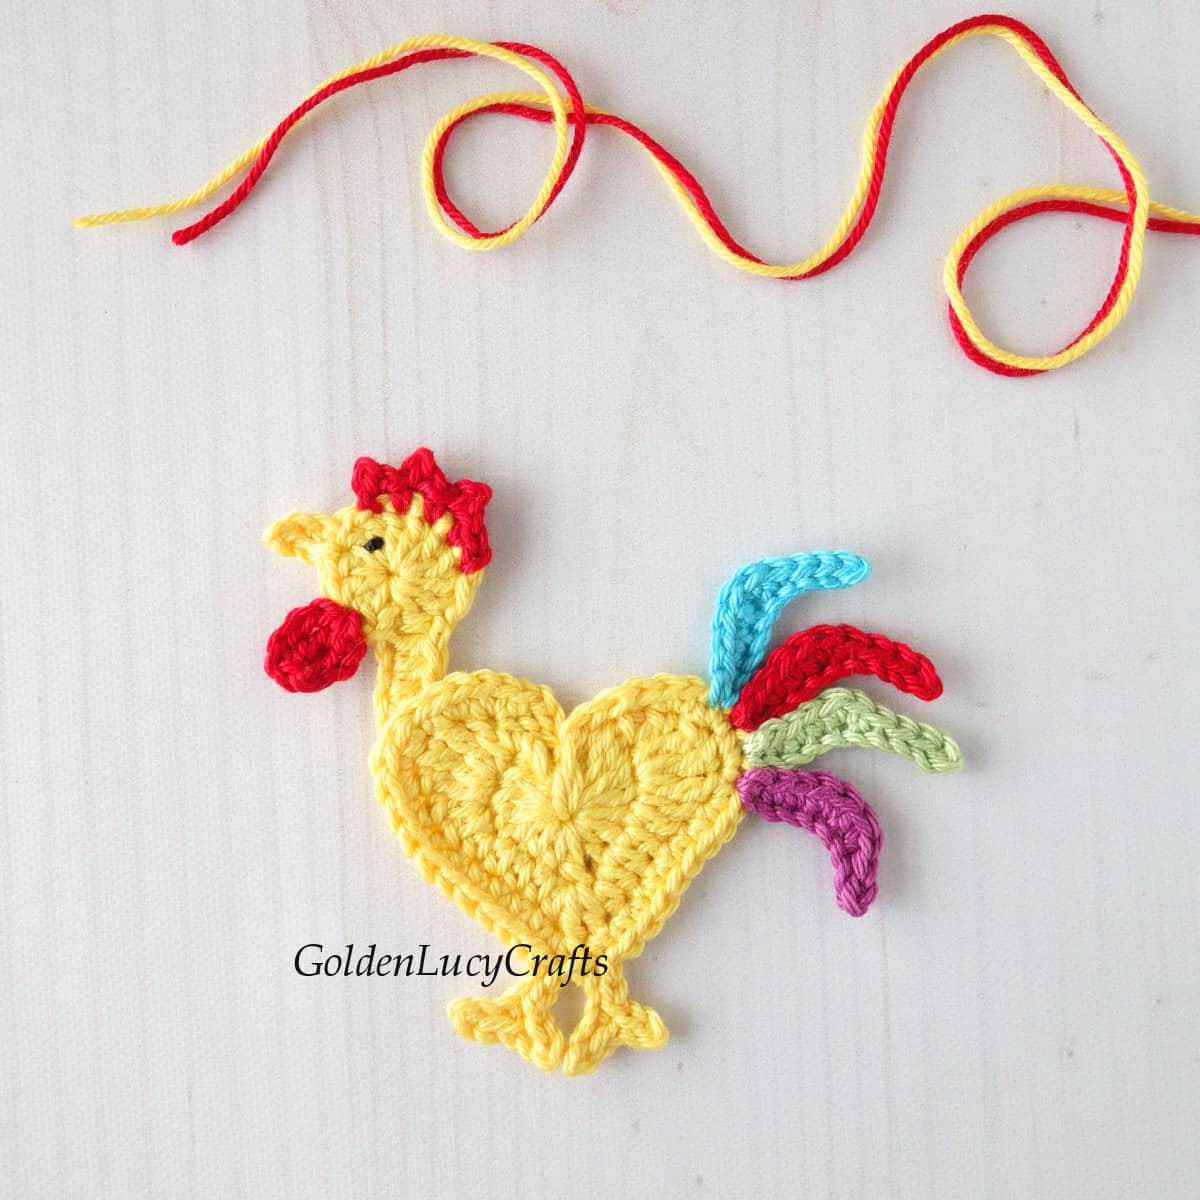 Crocheted colorful rooster applique.